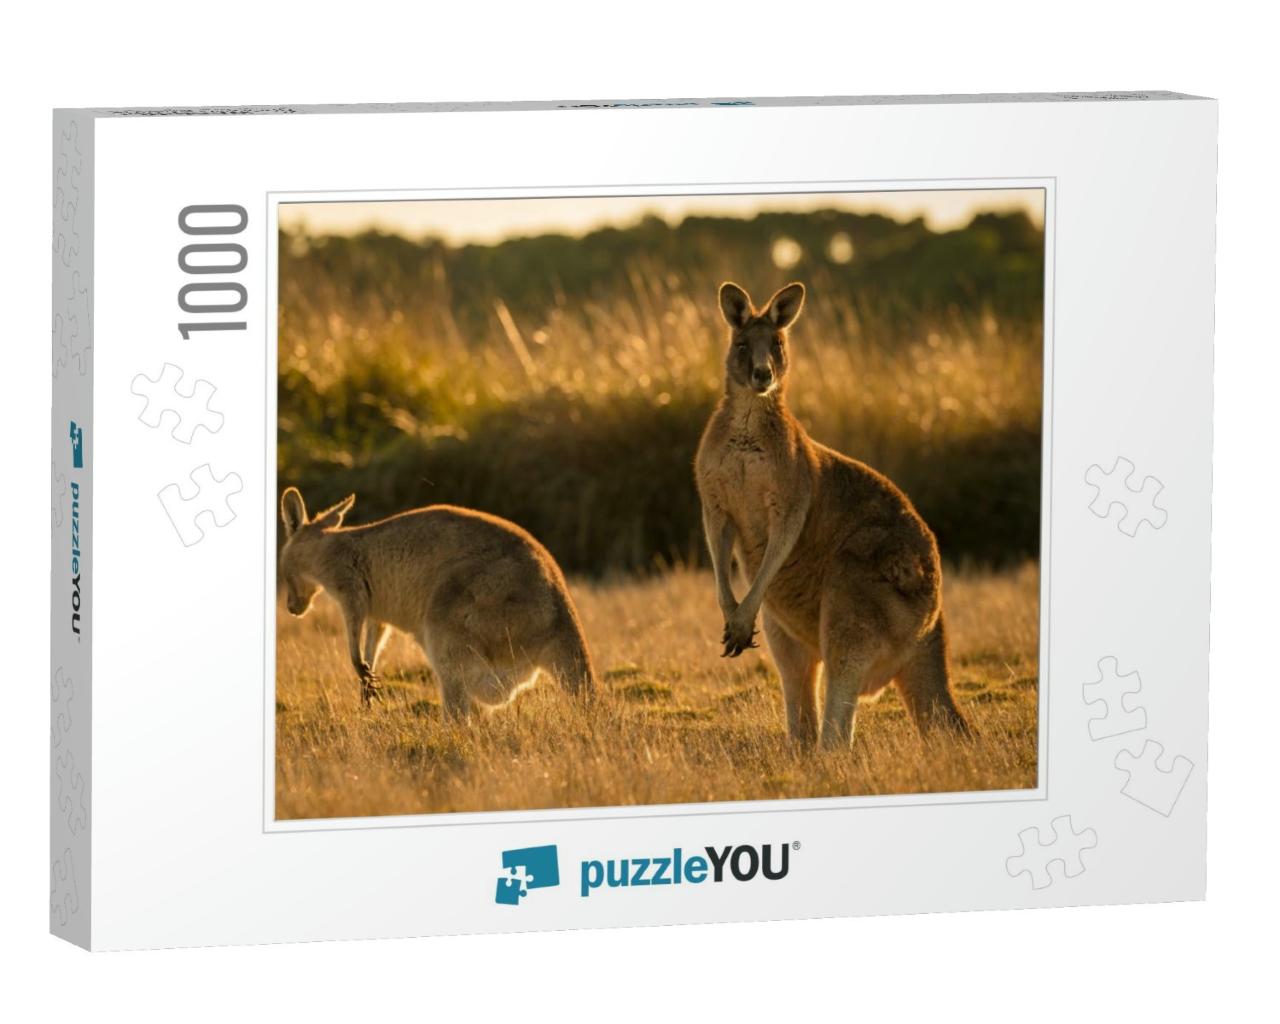 Kangaroo in Open Field During a Golden Sunset... Jigsaw Puzzle with 1000 pieces